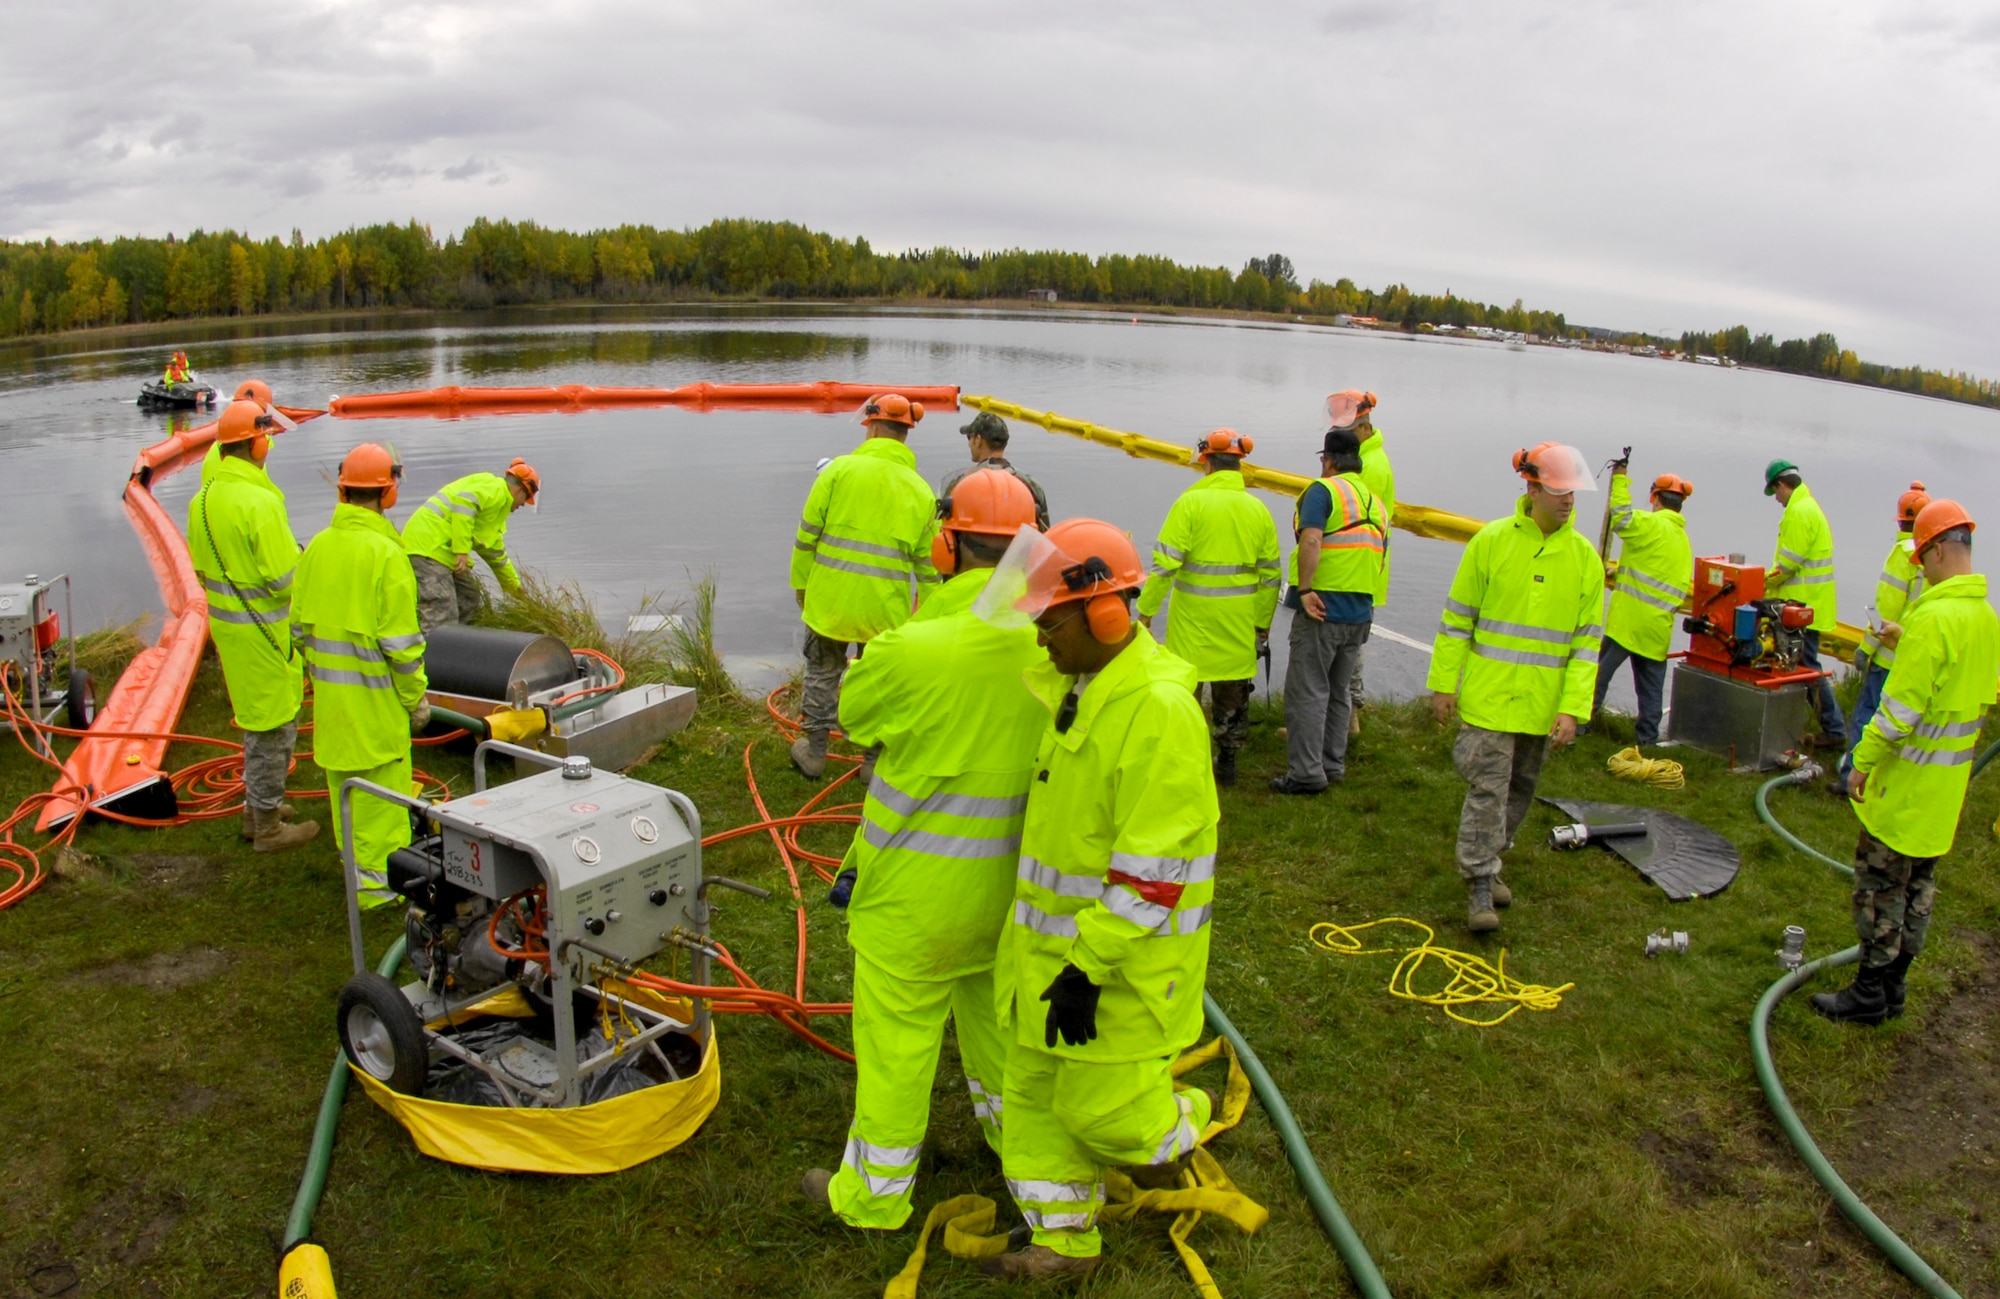 ELMENDORF AIR FORCE BASE, Alaska – Nearly 60 members from the 611th Civil Engineer Squadron practiced cleaning up a hazardous spill here Sept. 17. The 611th held its annual Fall Spill Drill Sept. 14-18. The 611th CES members are required to do hands-on training twice a year, one in the winter and practiced on thick ice and the second in the fall before the ice freezes over. (U.S. Air Force photo/Airman 1st Class Christopher Gross)